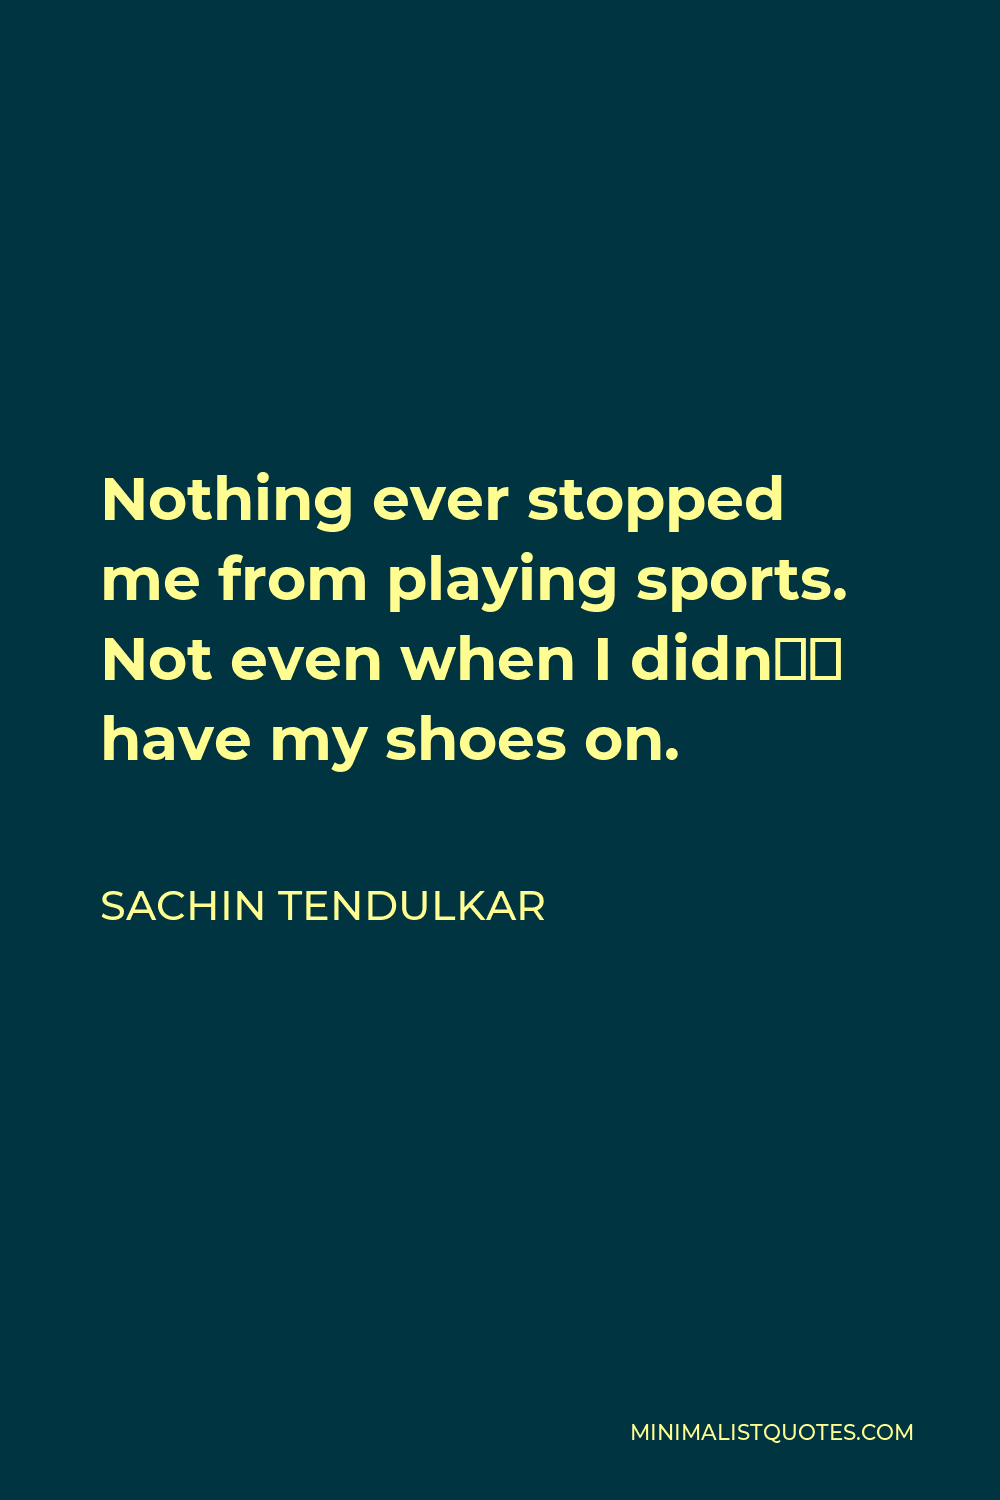 Sachin Tendulkar Quote - Nothing ever stopped me from playing sports. Not even when I didn’t have my shoes on.